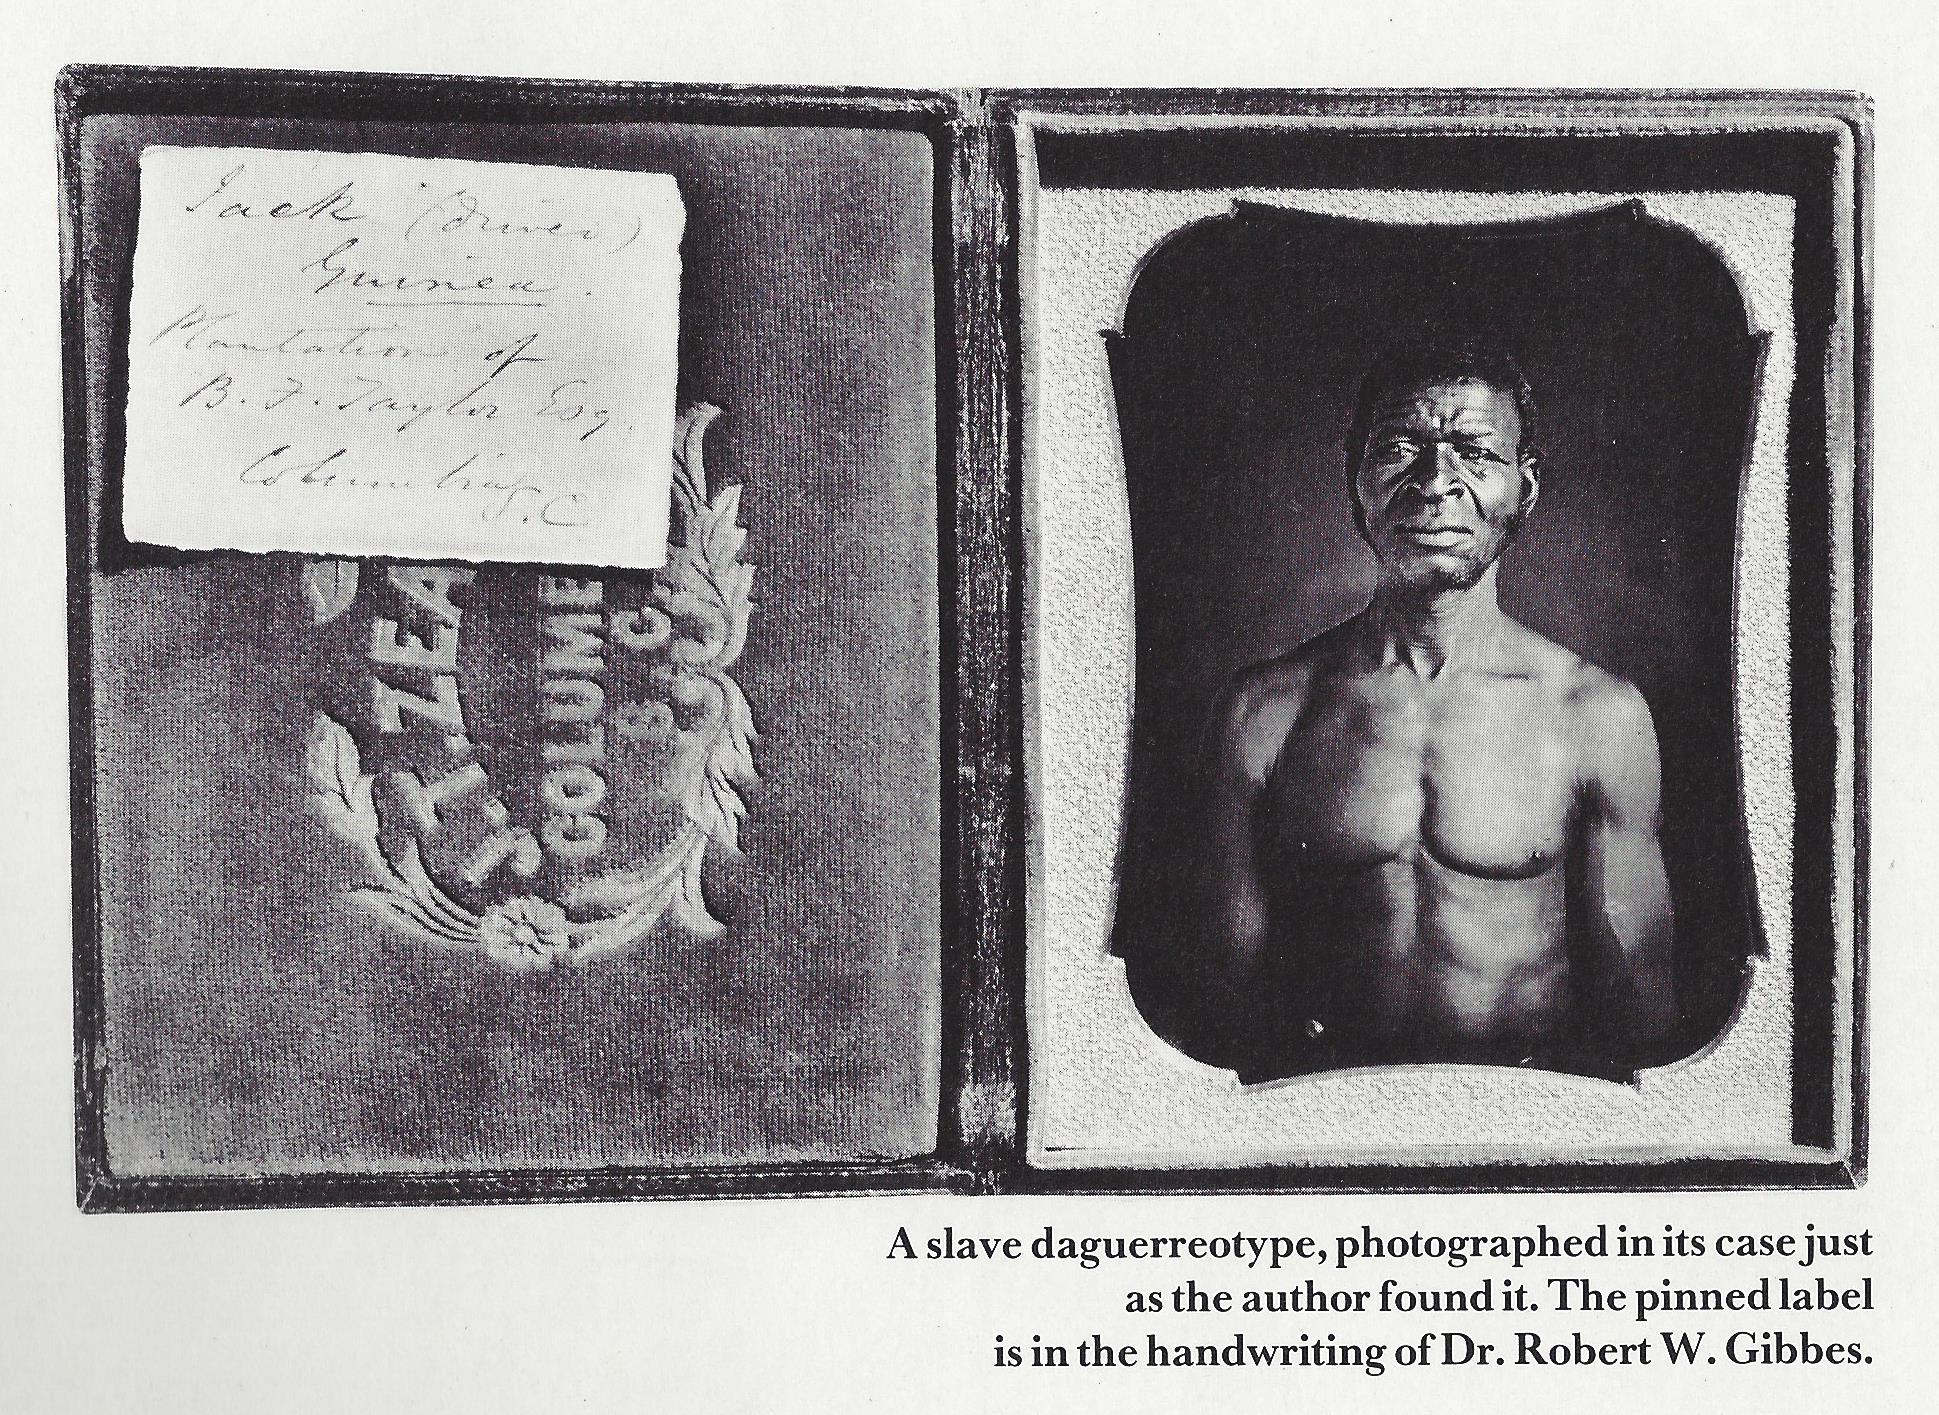 The photos of slaves were discovered by Elinor Reichlin, a researcher at Peabody Museum, and published in American Heritage in 1970. 